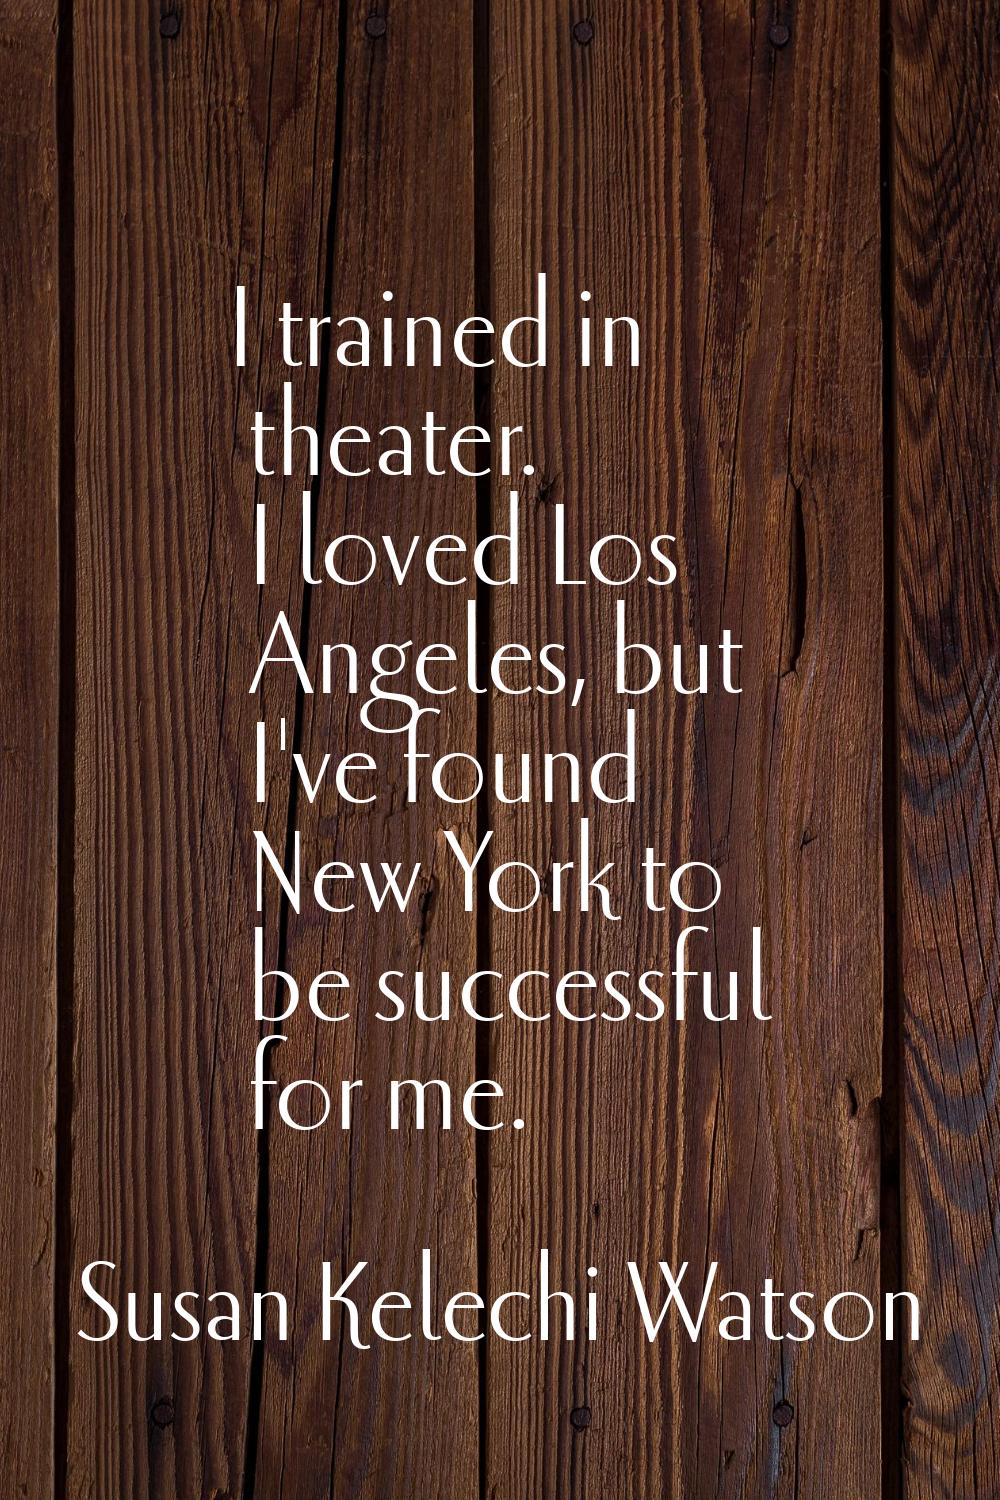 I trained in theater. I loved Los Angeles, but I've found New York to be successful for me.